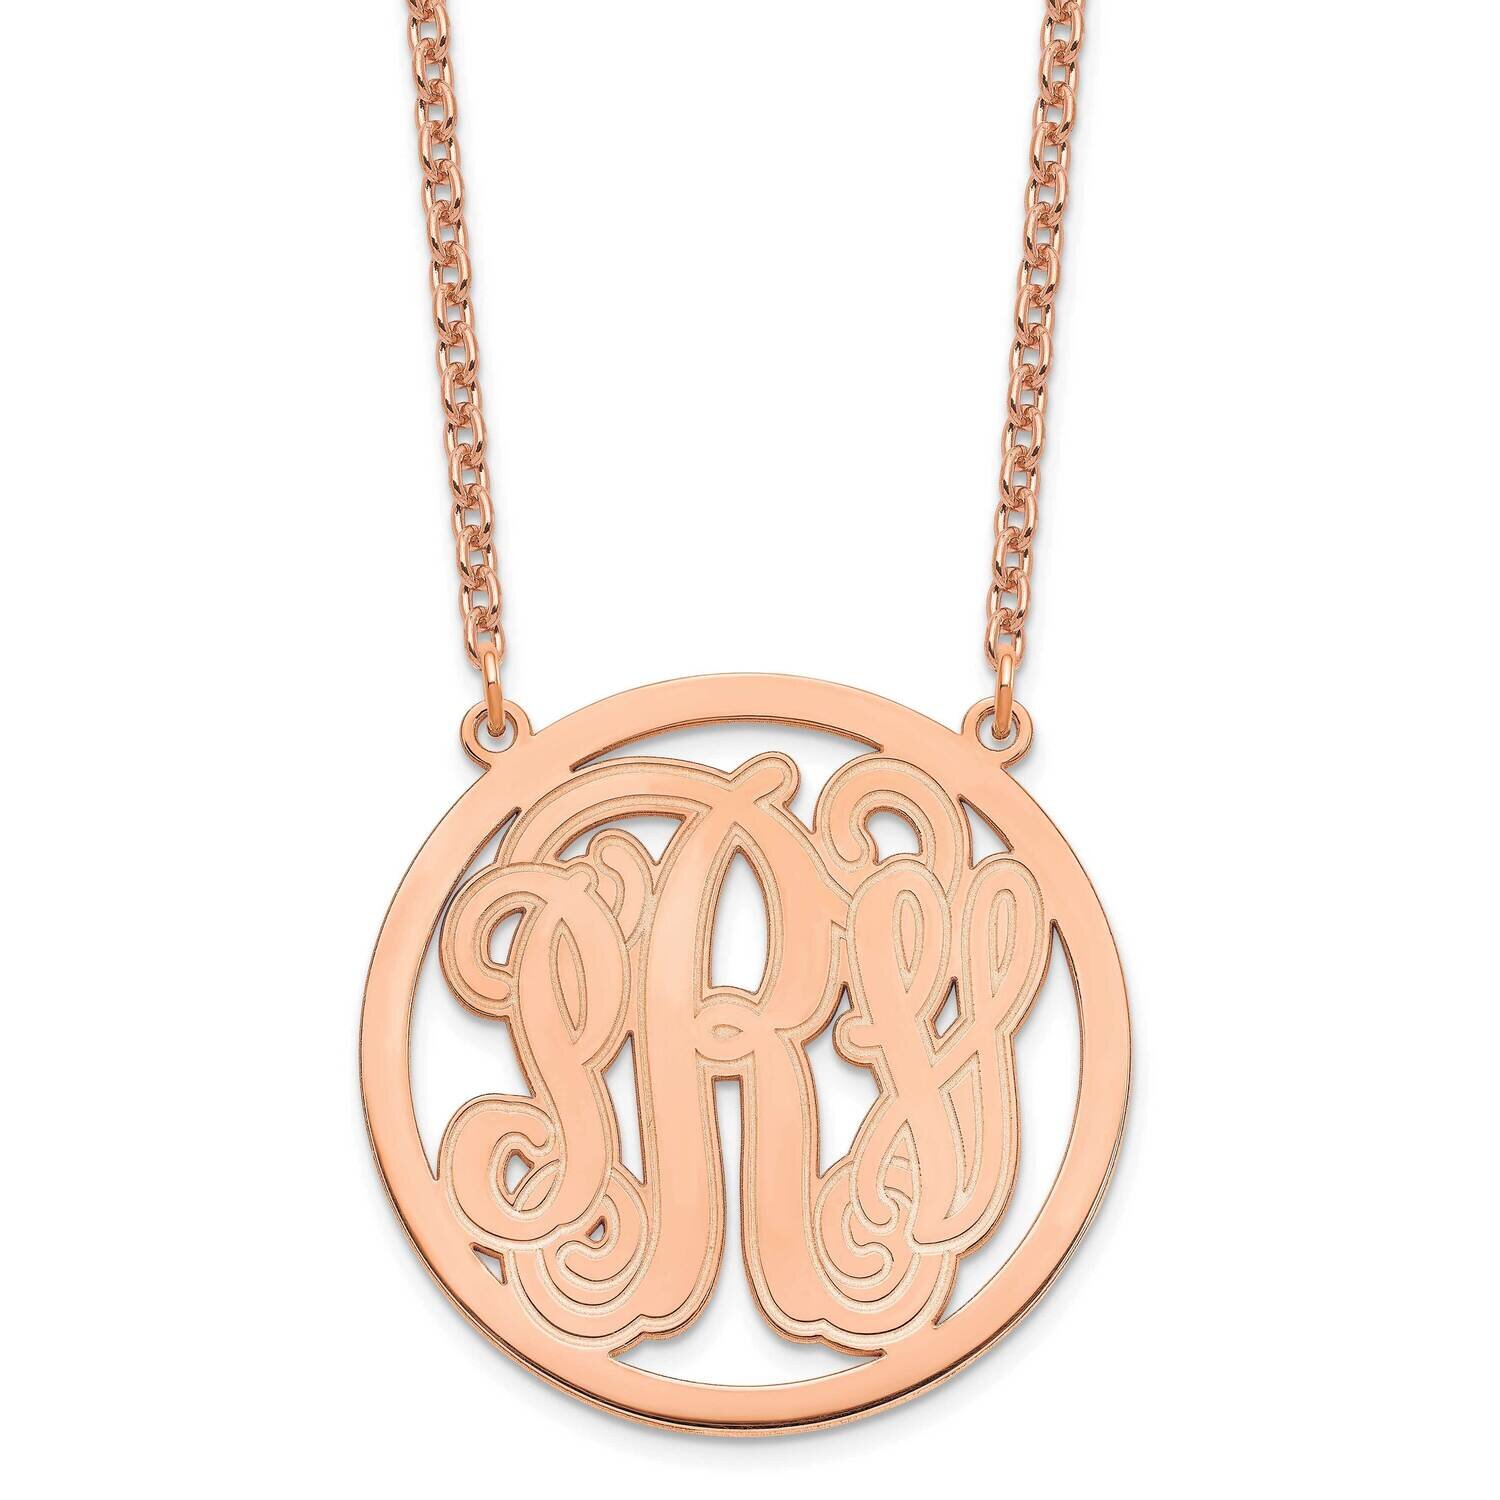 Large Etched Monogram Circle Necklace Sterling Silver Rose-plated XNA565RP